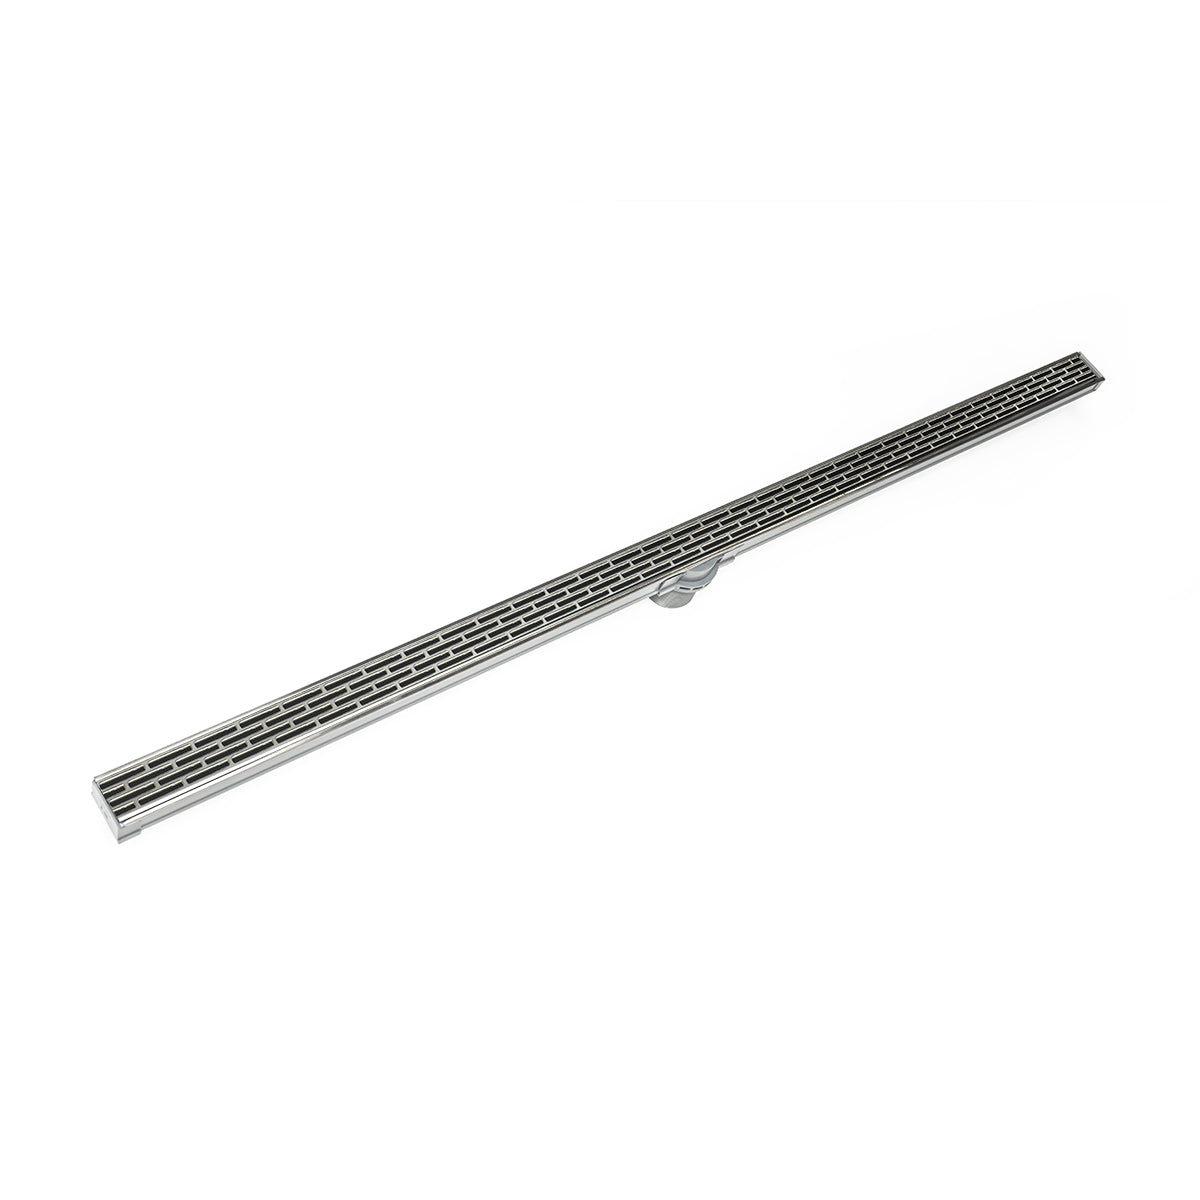 Infinity Drain 48" S-PVC Series Low Profile Site Sizable Linear Drain Kit with 1 1/2" Perforated Offset Slot Grate